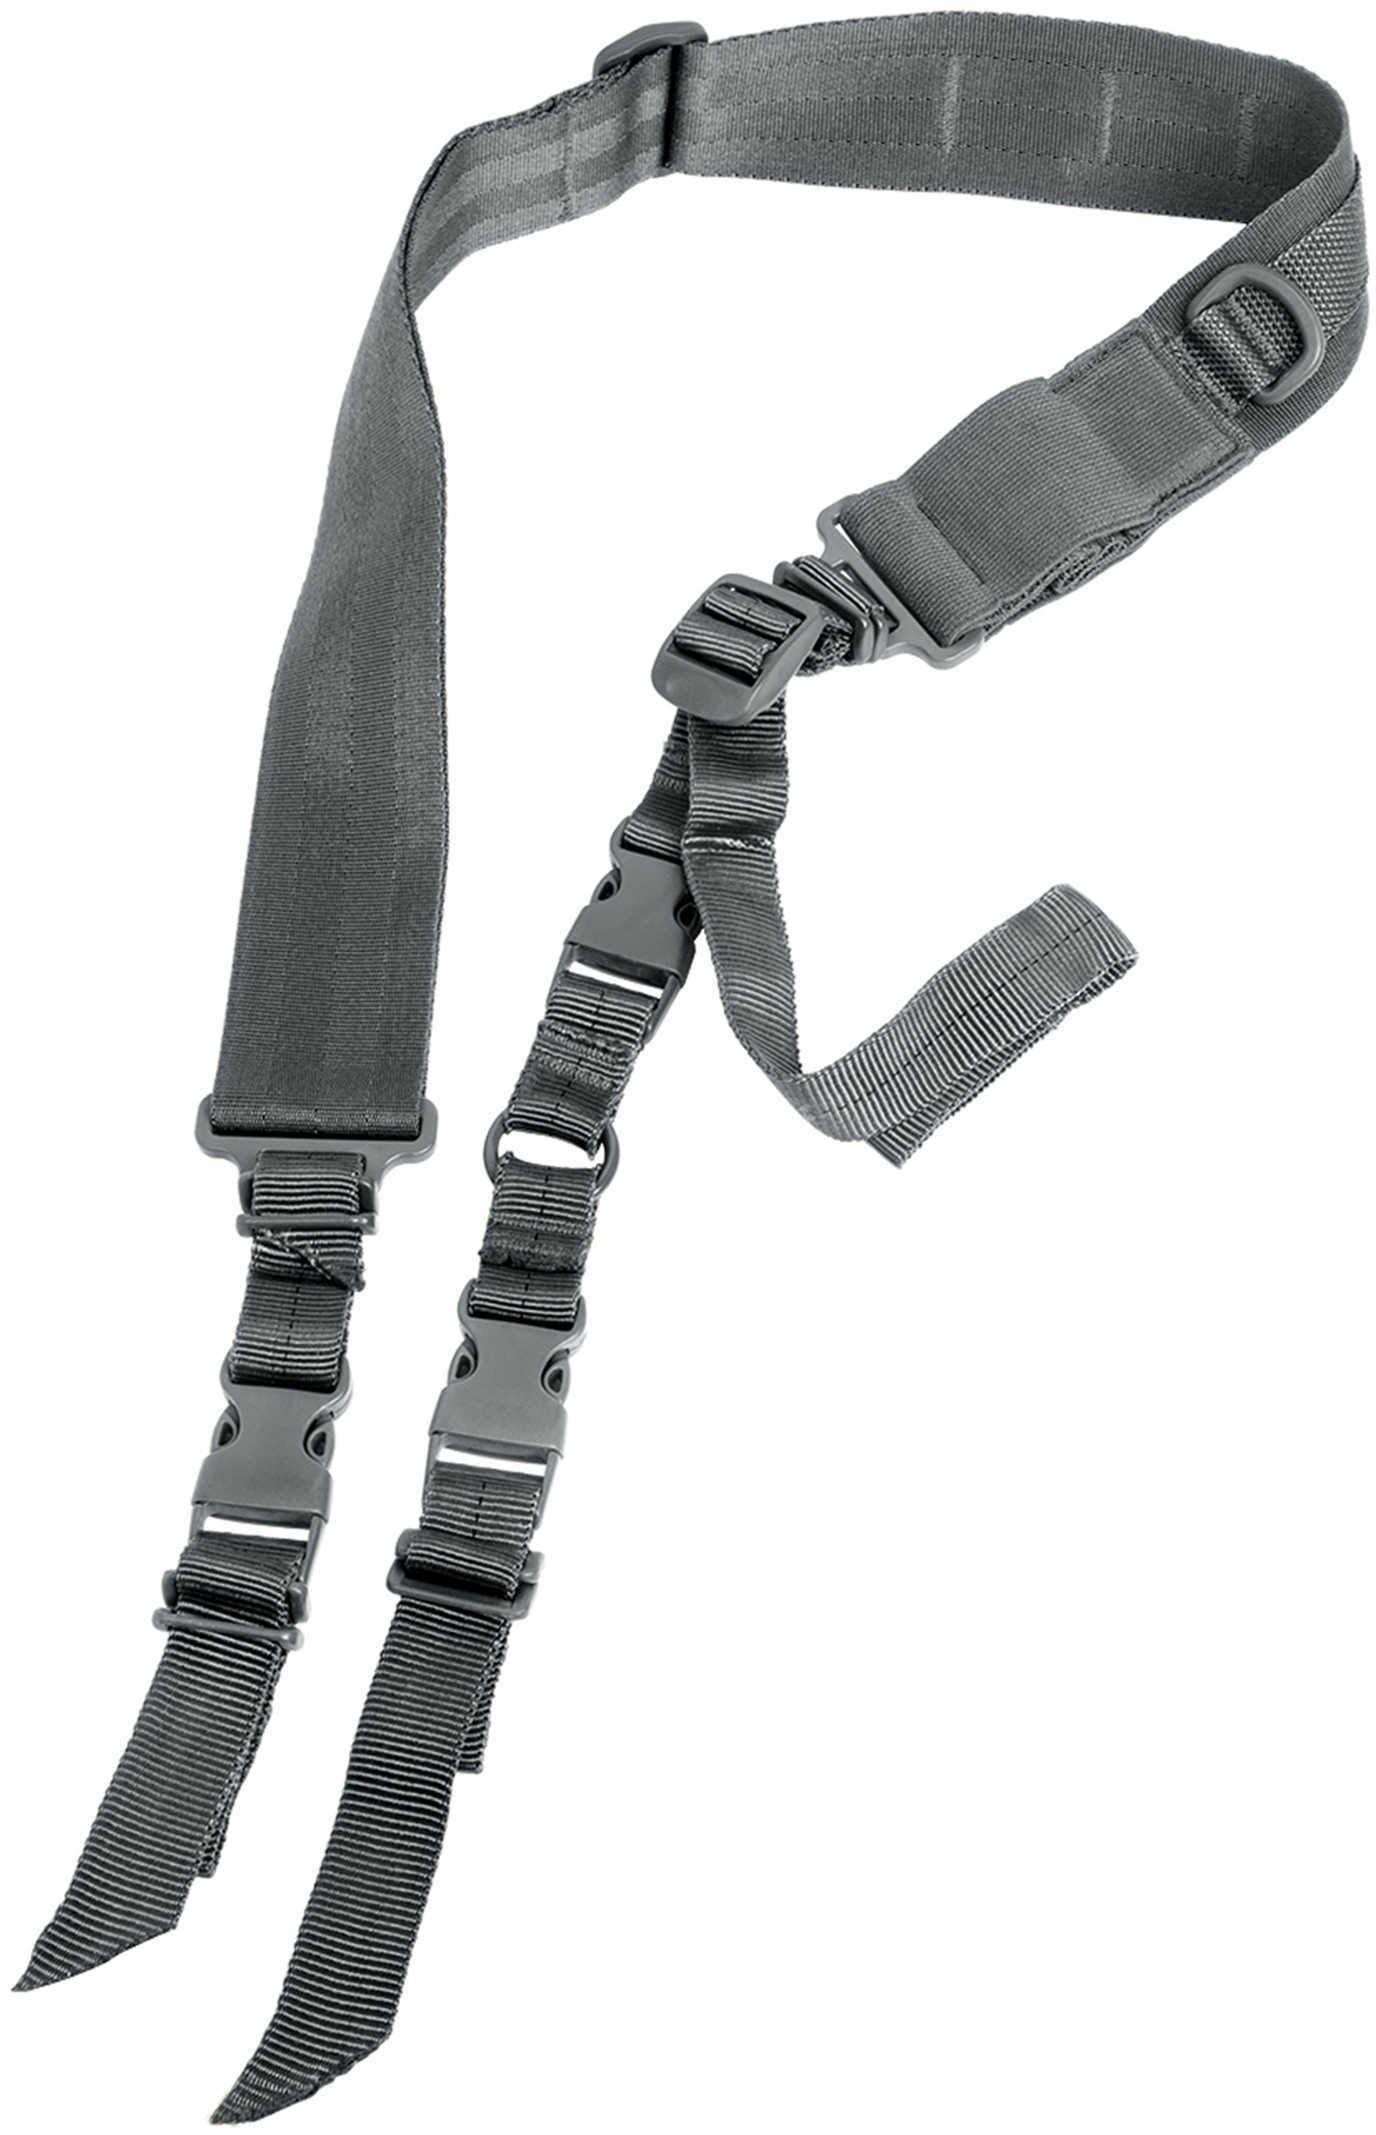 NcStar 2 Point Tactical Sling Urban Gray Md: AARS2PU